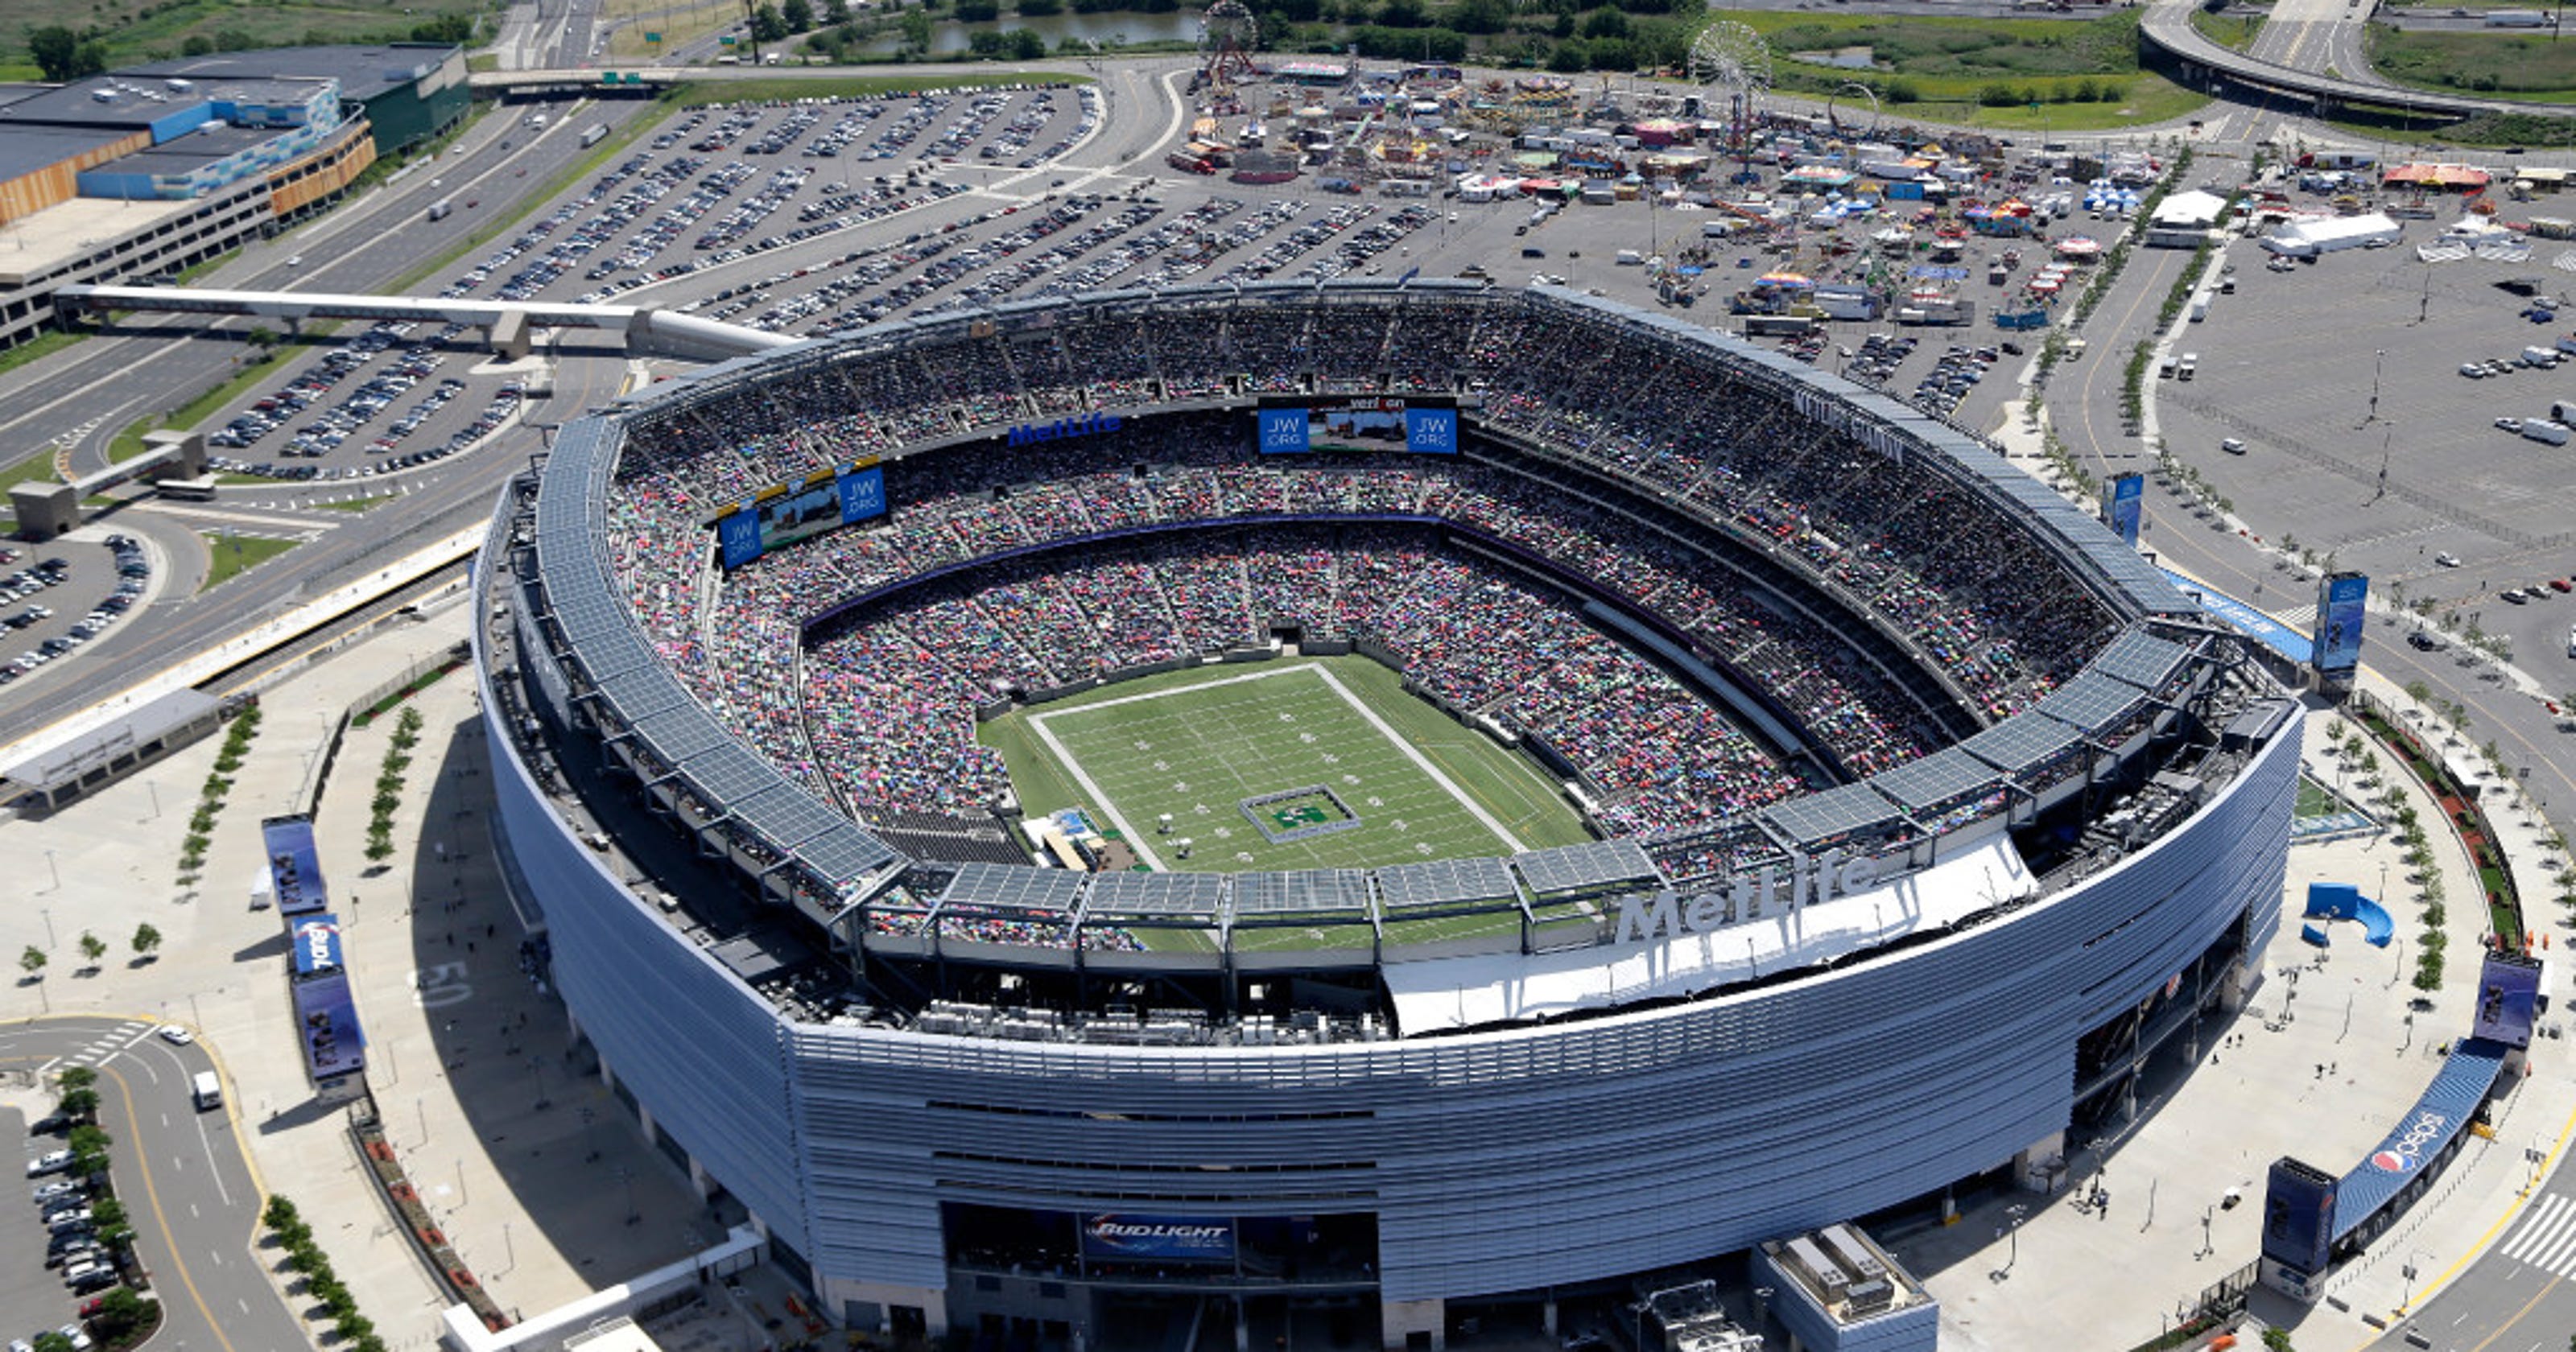 MetLife Stadium beats the world to win Venue of the Year award